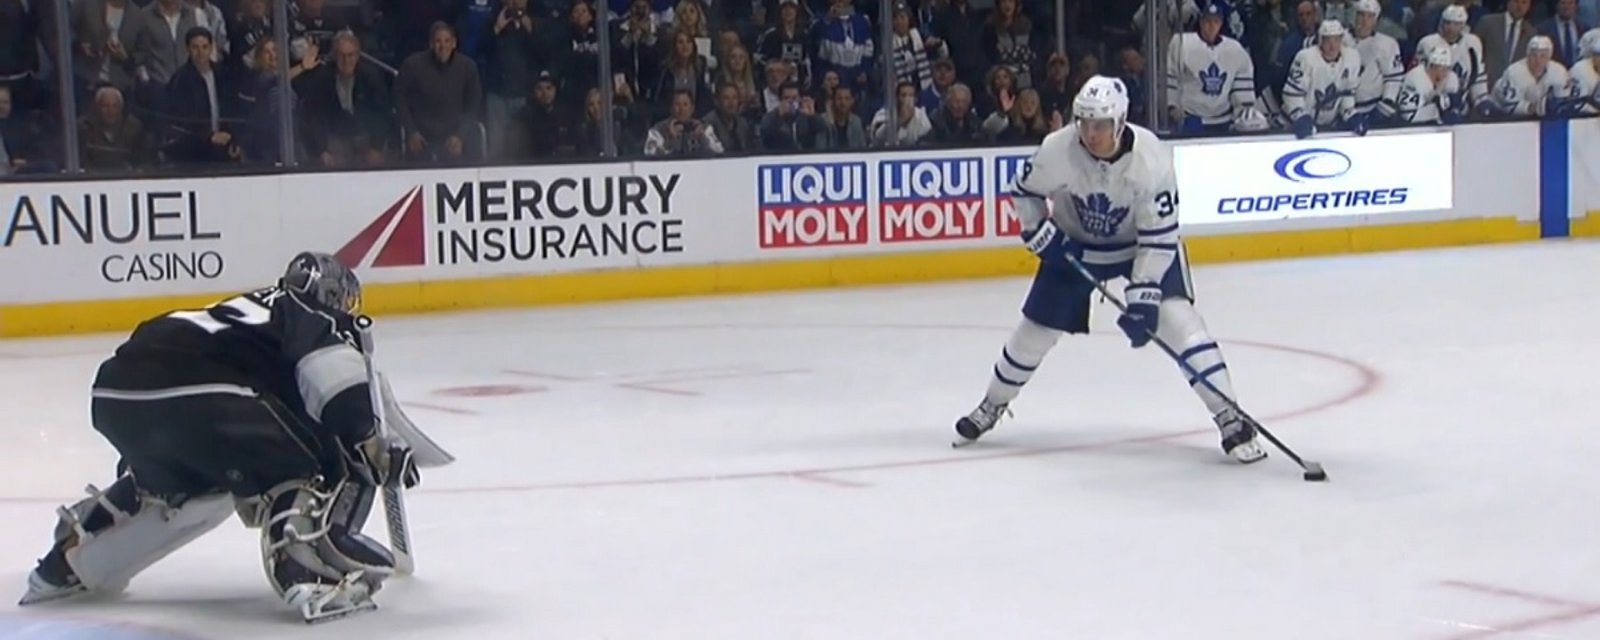 Must see: Auston Matthews scores his 50th career goal on the penalty shot. 